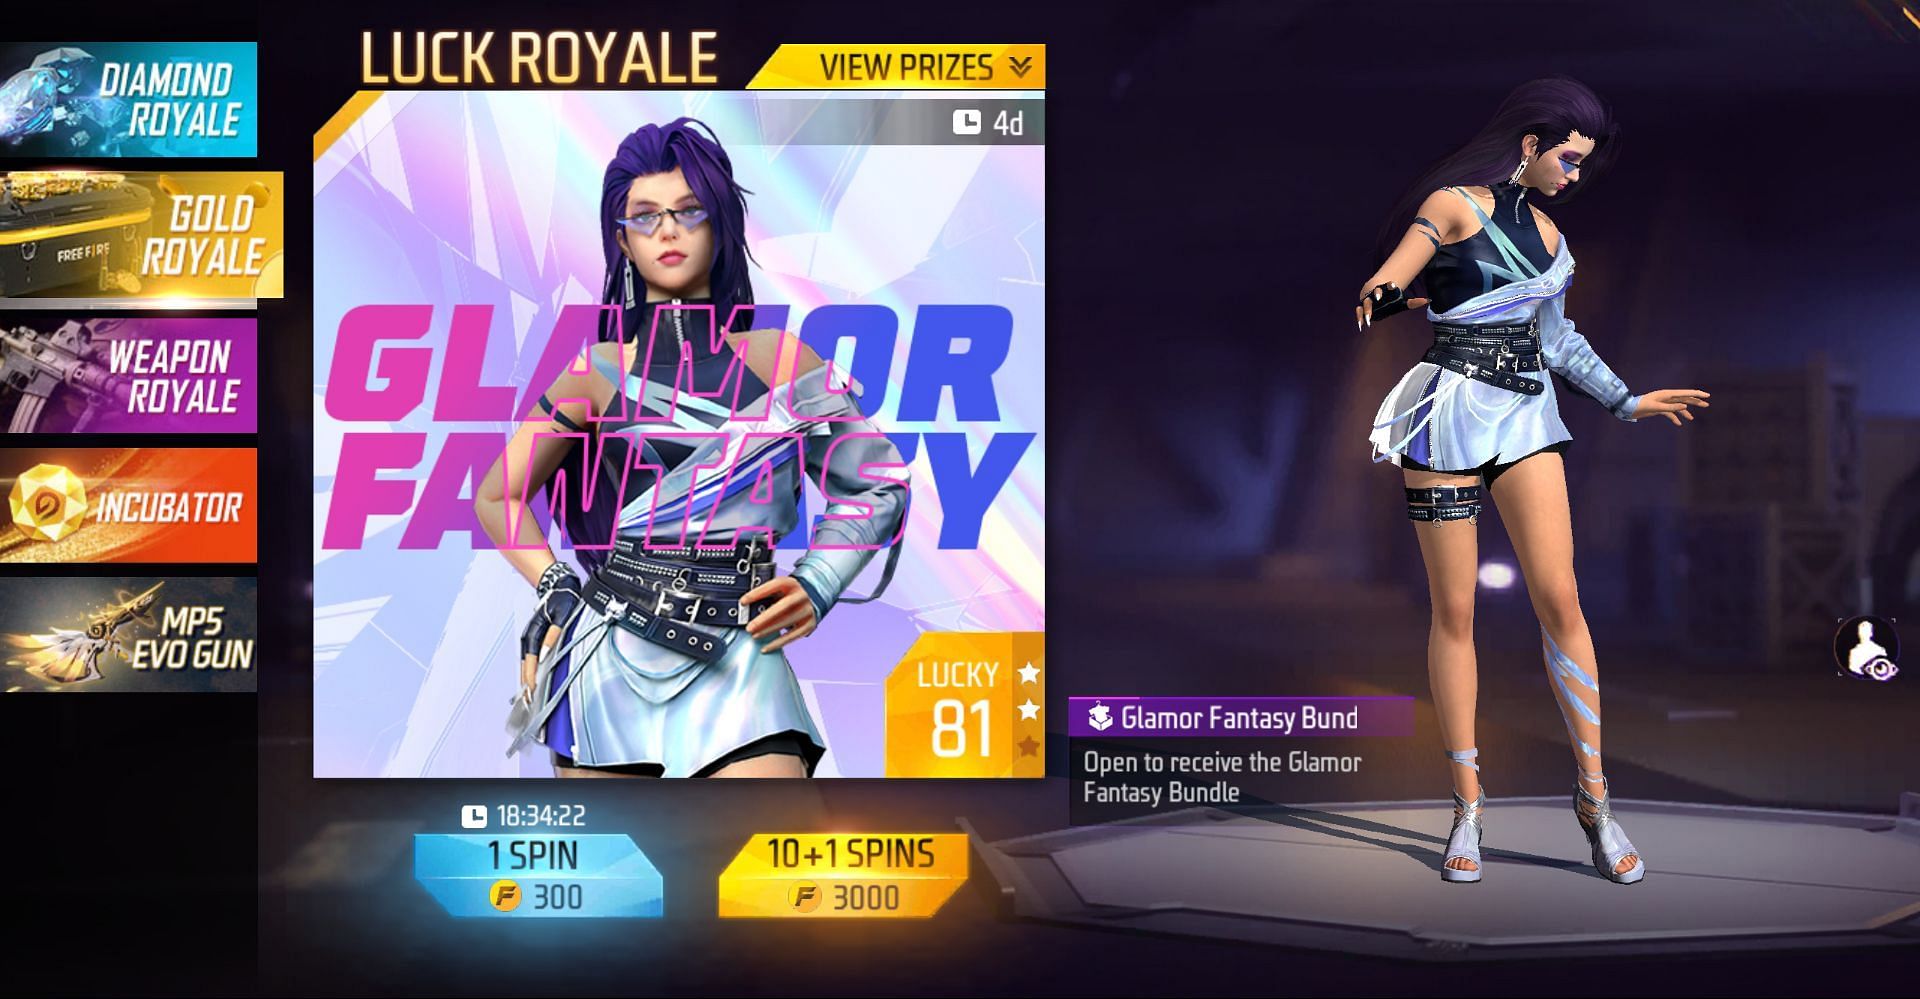 Select the Diamond Royale option from the menu on the right (Image via Garena)